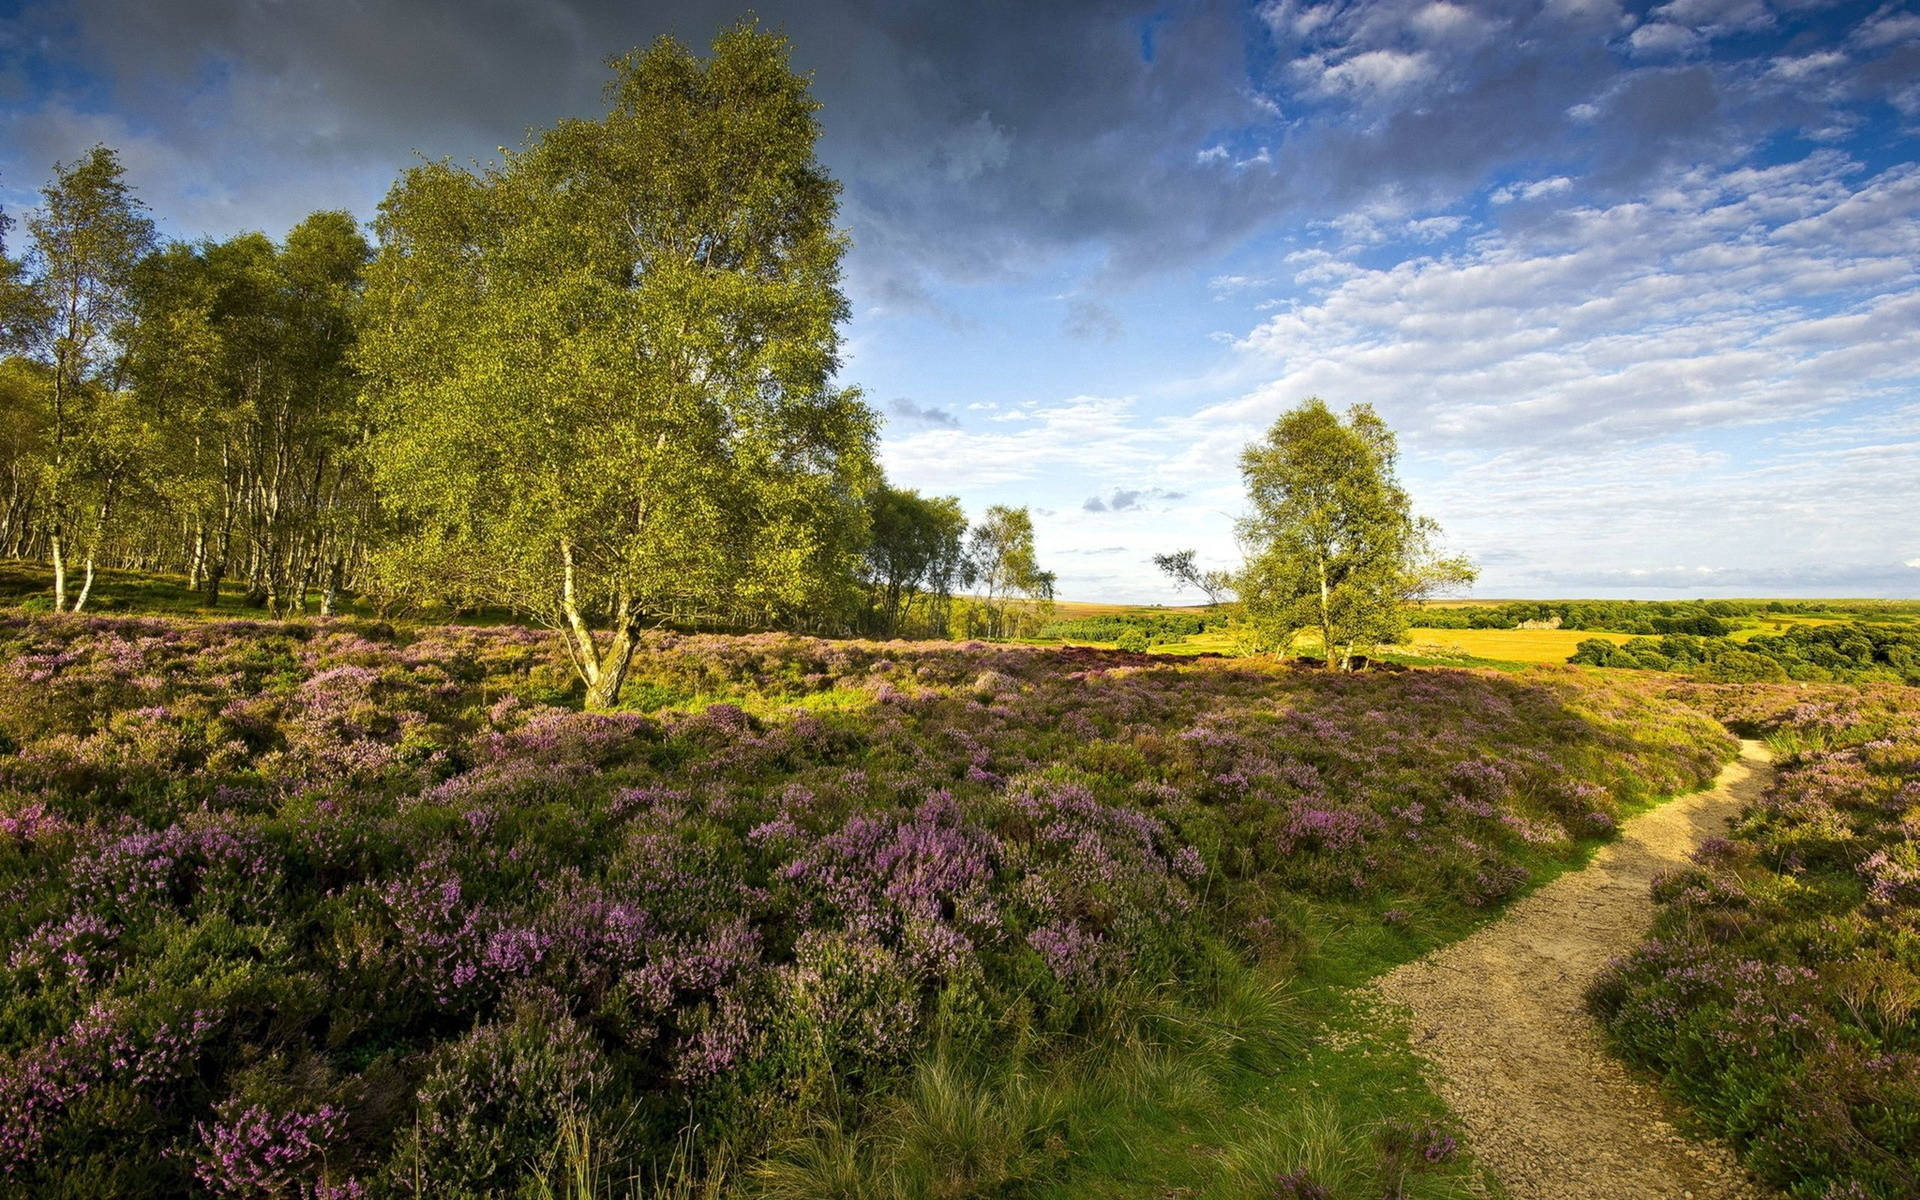 Take the tranquil path through the meadow of lavender grass Wallpaper